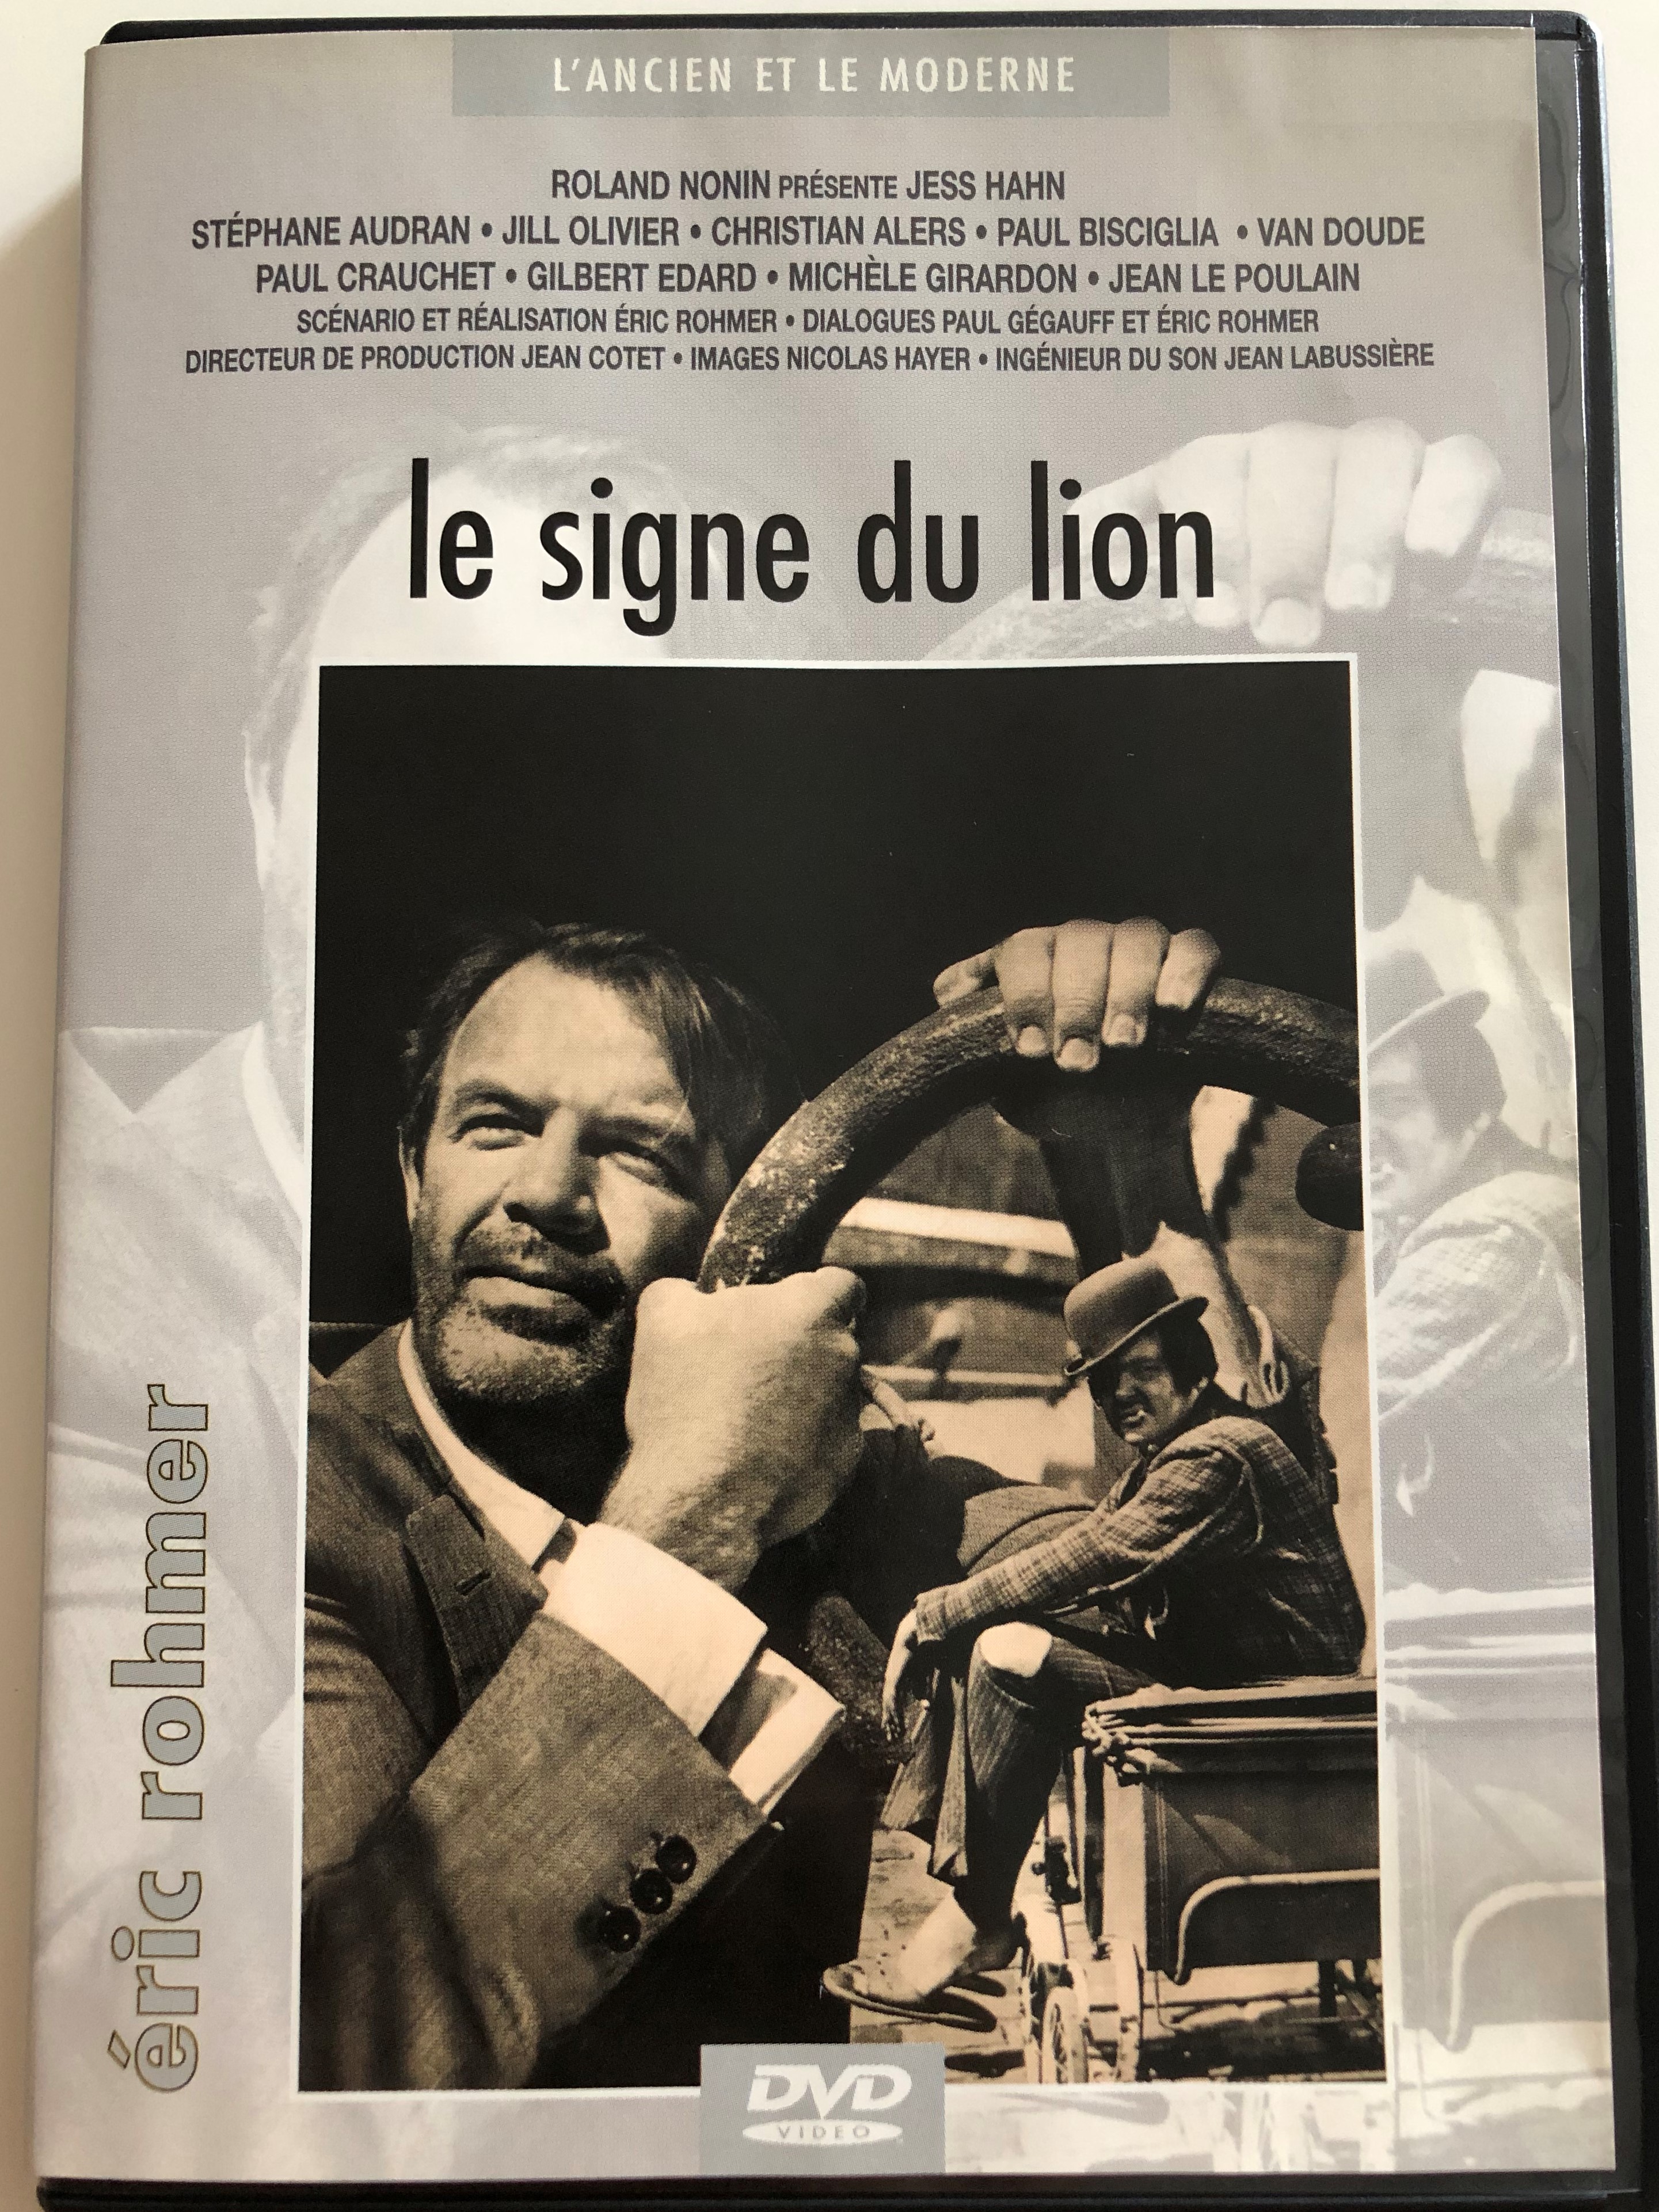 le-signe-du-lion-dvd-1962-the-sign-of-leo-directed-by-ric-rohmer-starring-jess-hahn-jean-le-poulain-van-doude-b-w-french-classic-1-.jpg